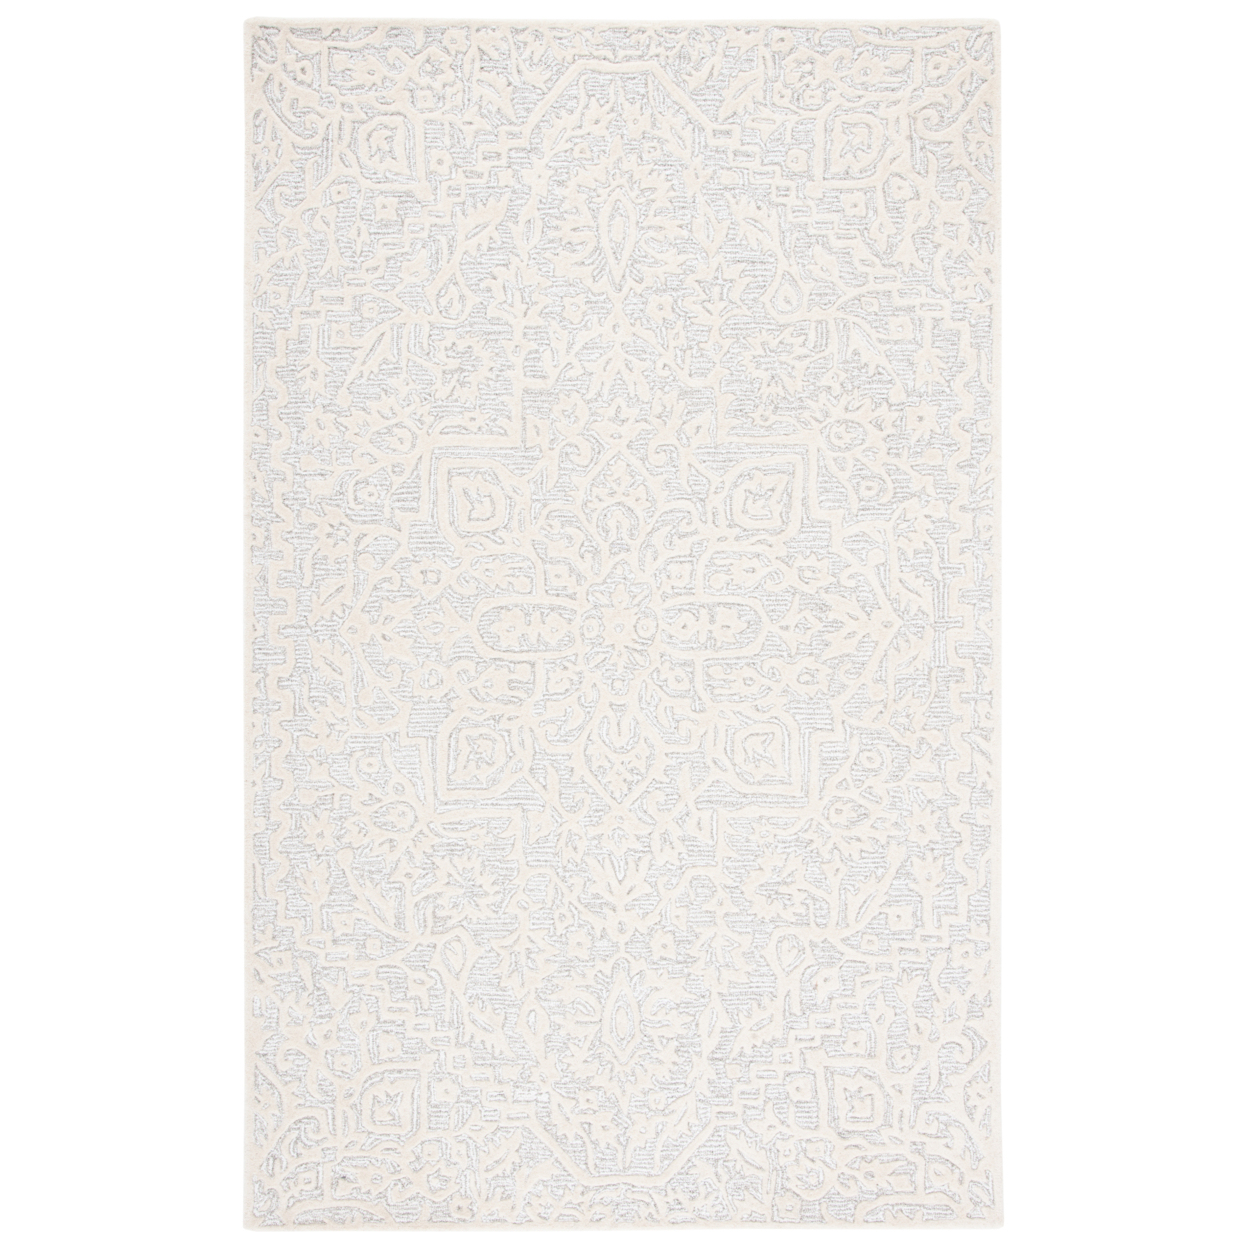 SAFAVIEH Antiquity AT861G Handmade Silver / Ivory Rug - 6' Square